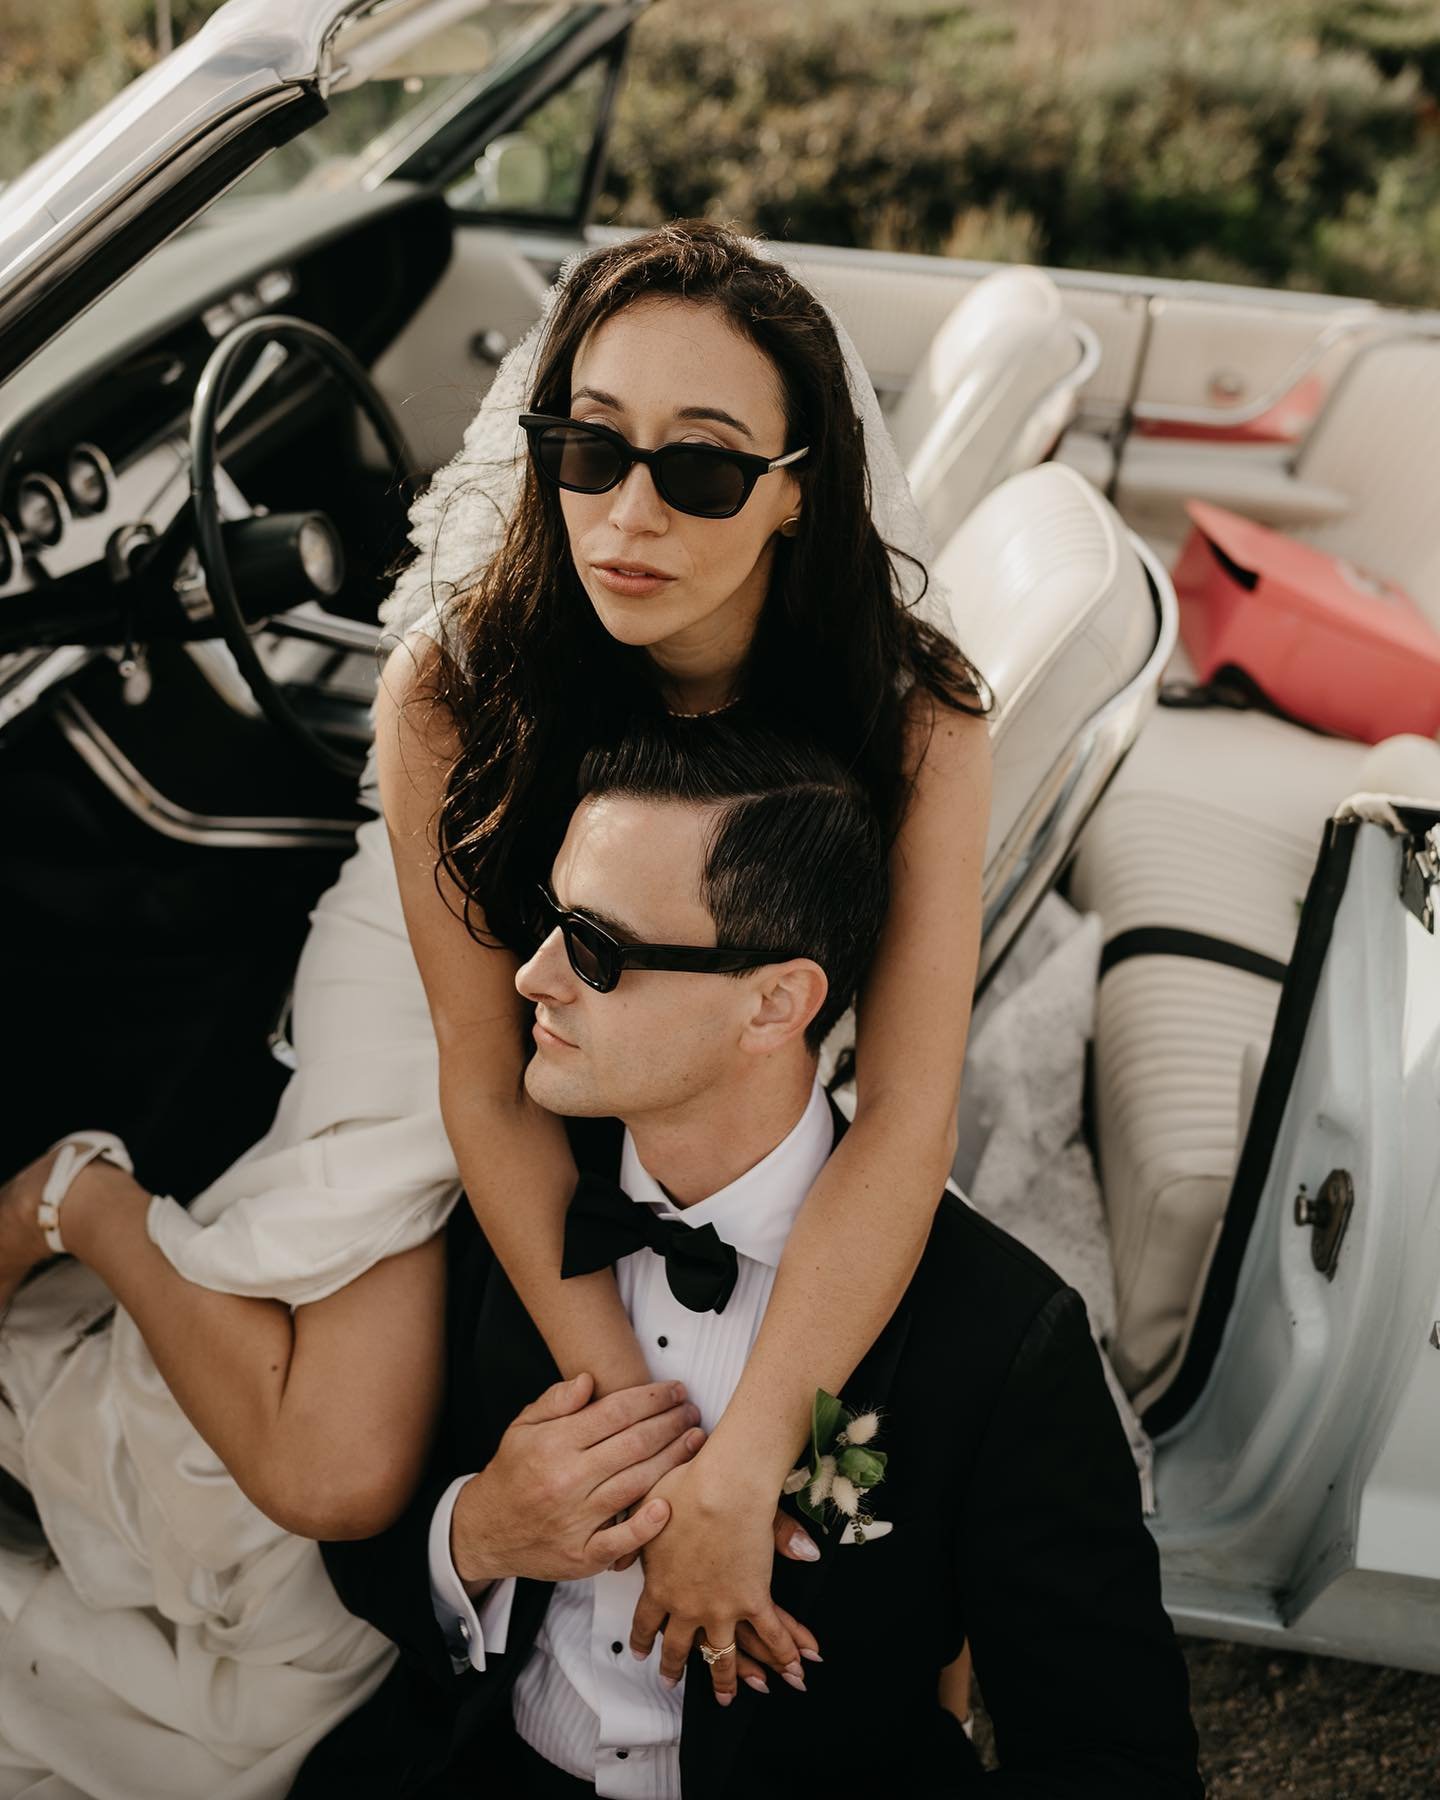 Could have shot with C &amp; G and this car all day. 

Fun fact ; G was a baby model just like me! 

 #florencewedding #florencephotographer #palmspringswedding #palmspringselopement #joshuatreewedding #mtrainerwedding #joshuatreeelopement #joshuatre